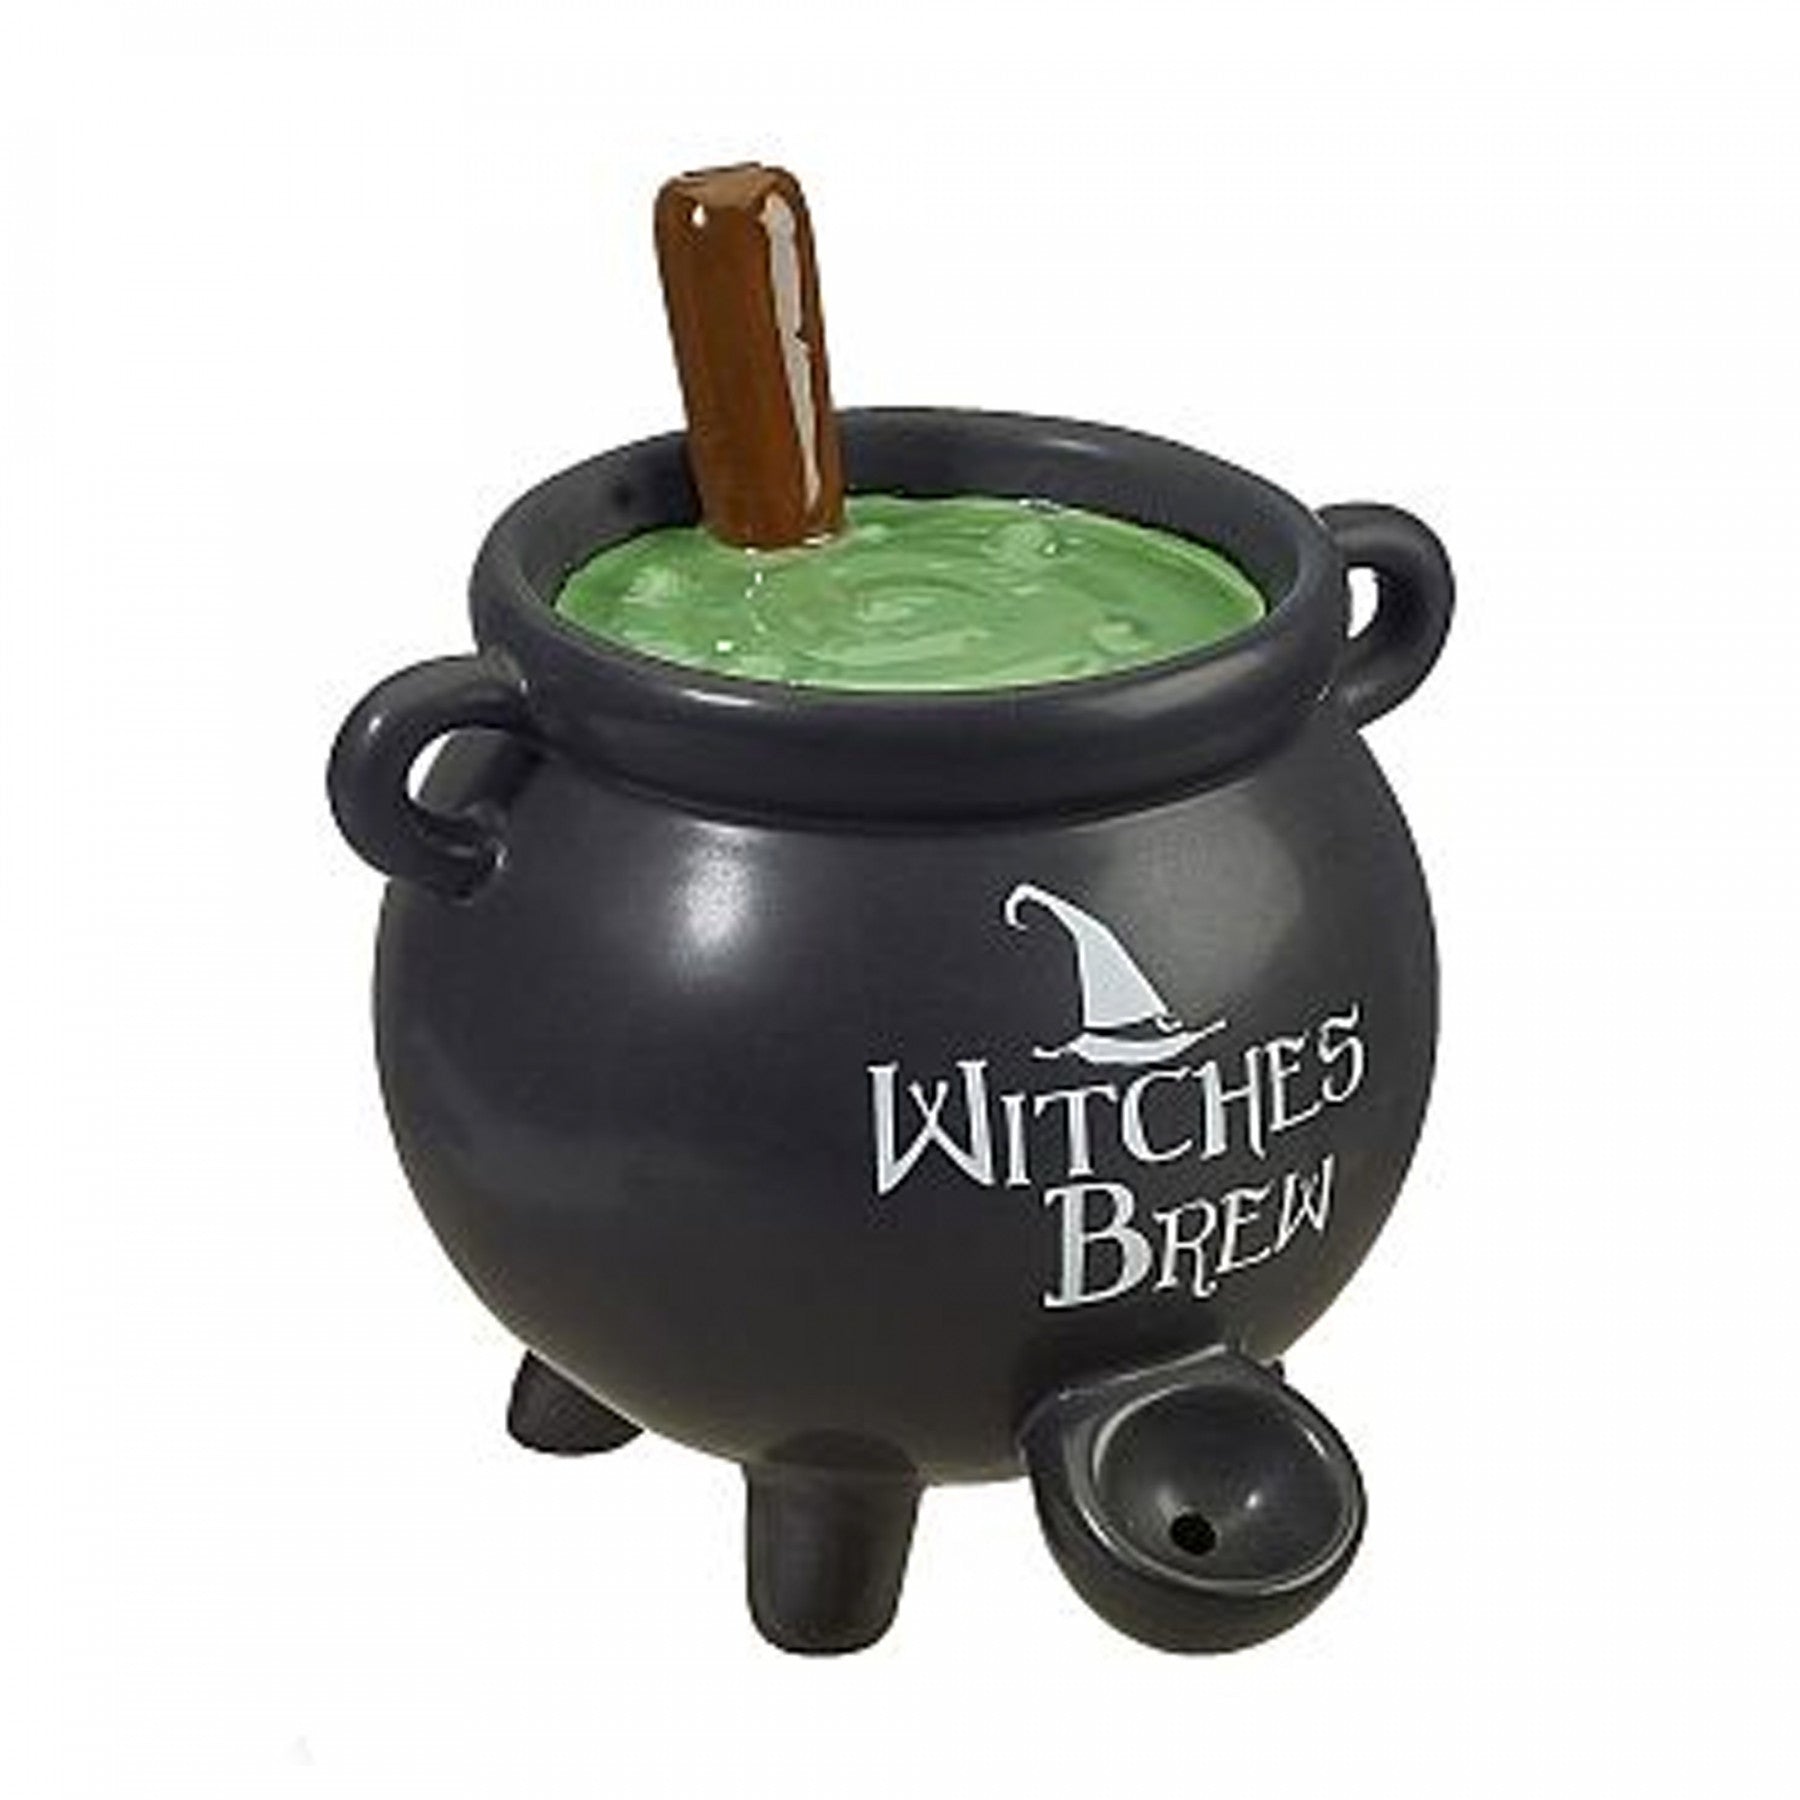 Witches Brew Cauldron Ceramic Pipe by Fashioncraft. Vancouver, B.C., Canada